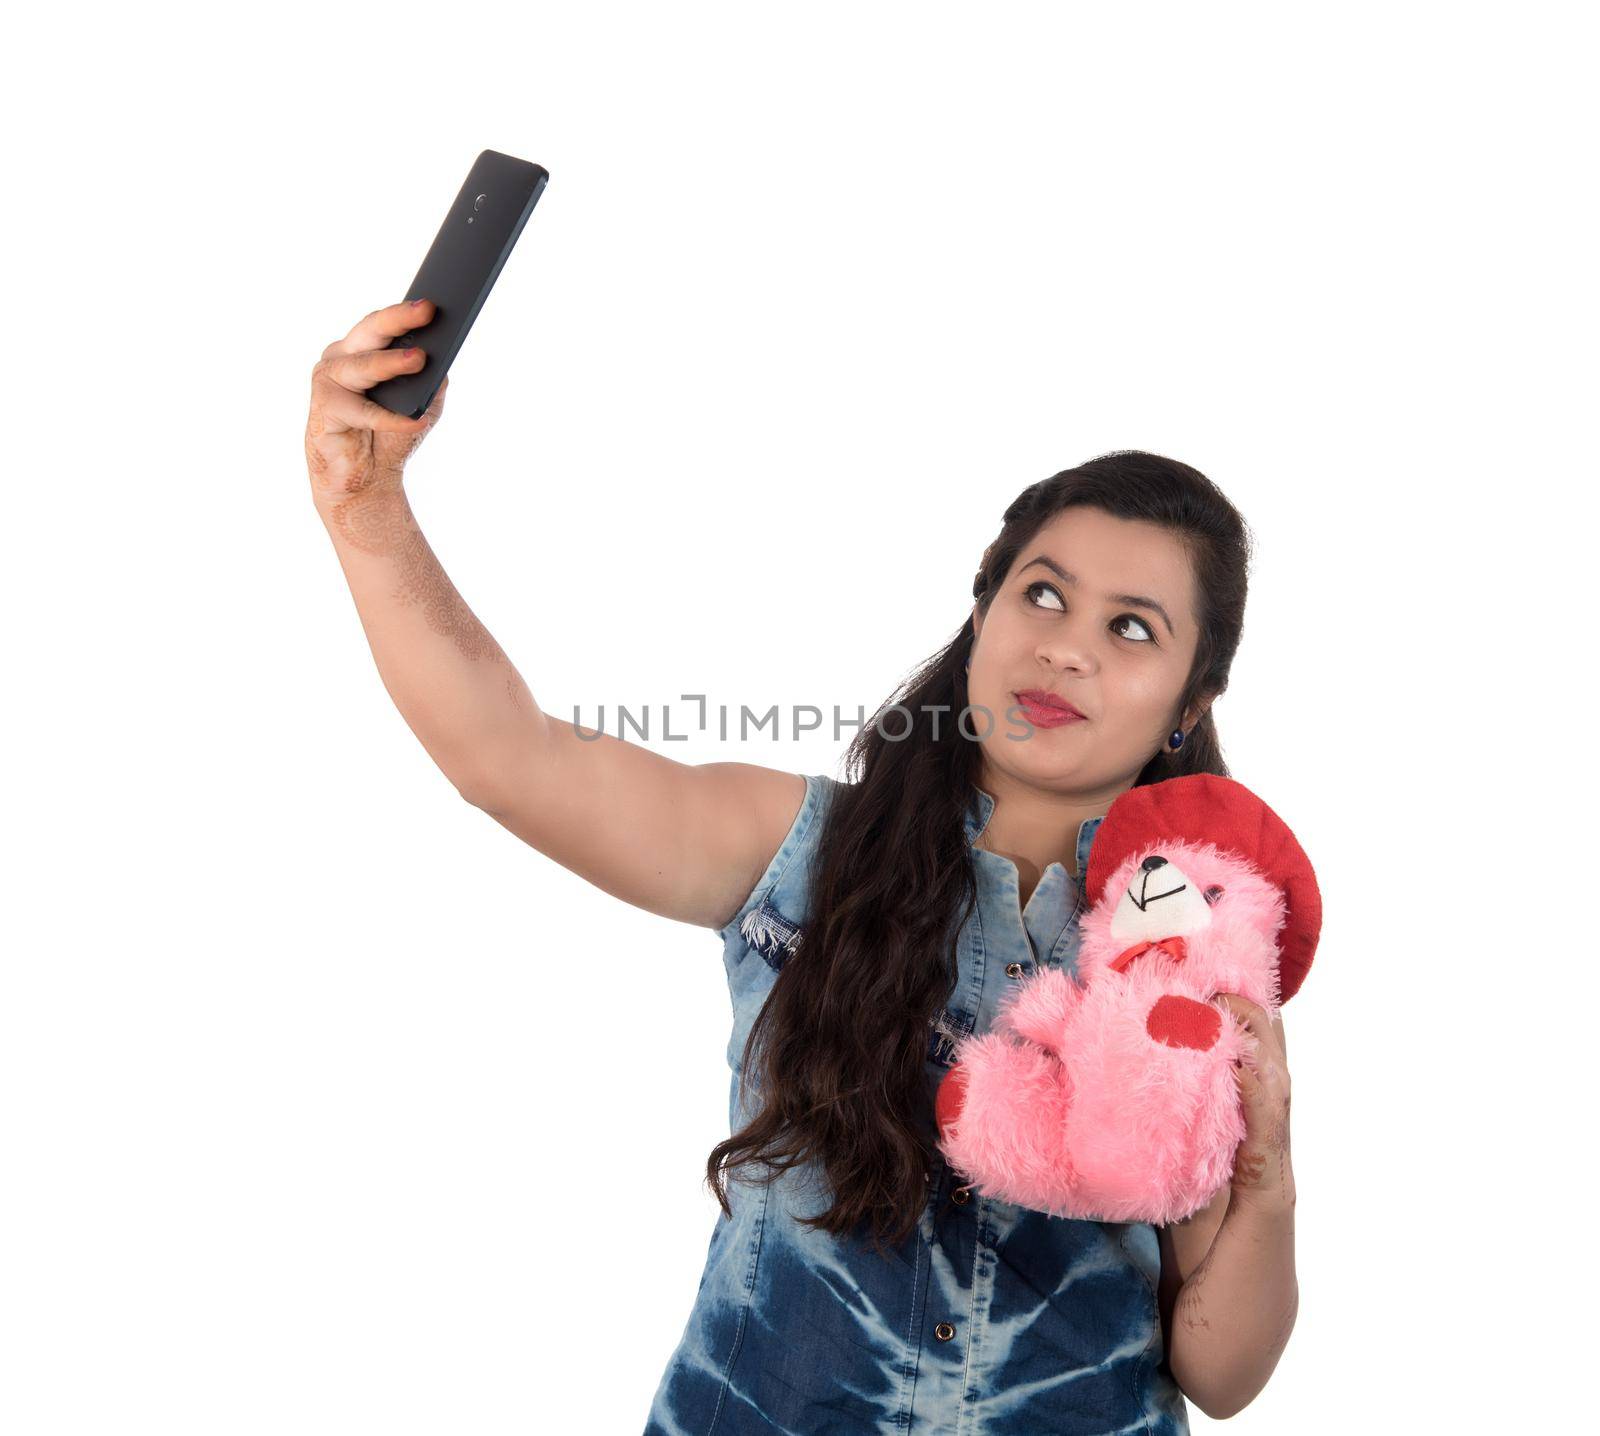 Woman taking picture or selfie with mobile phone and holding teddy bear